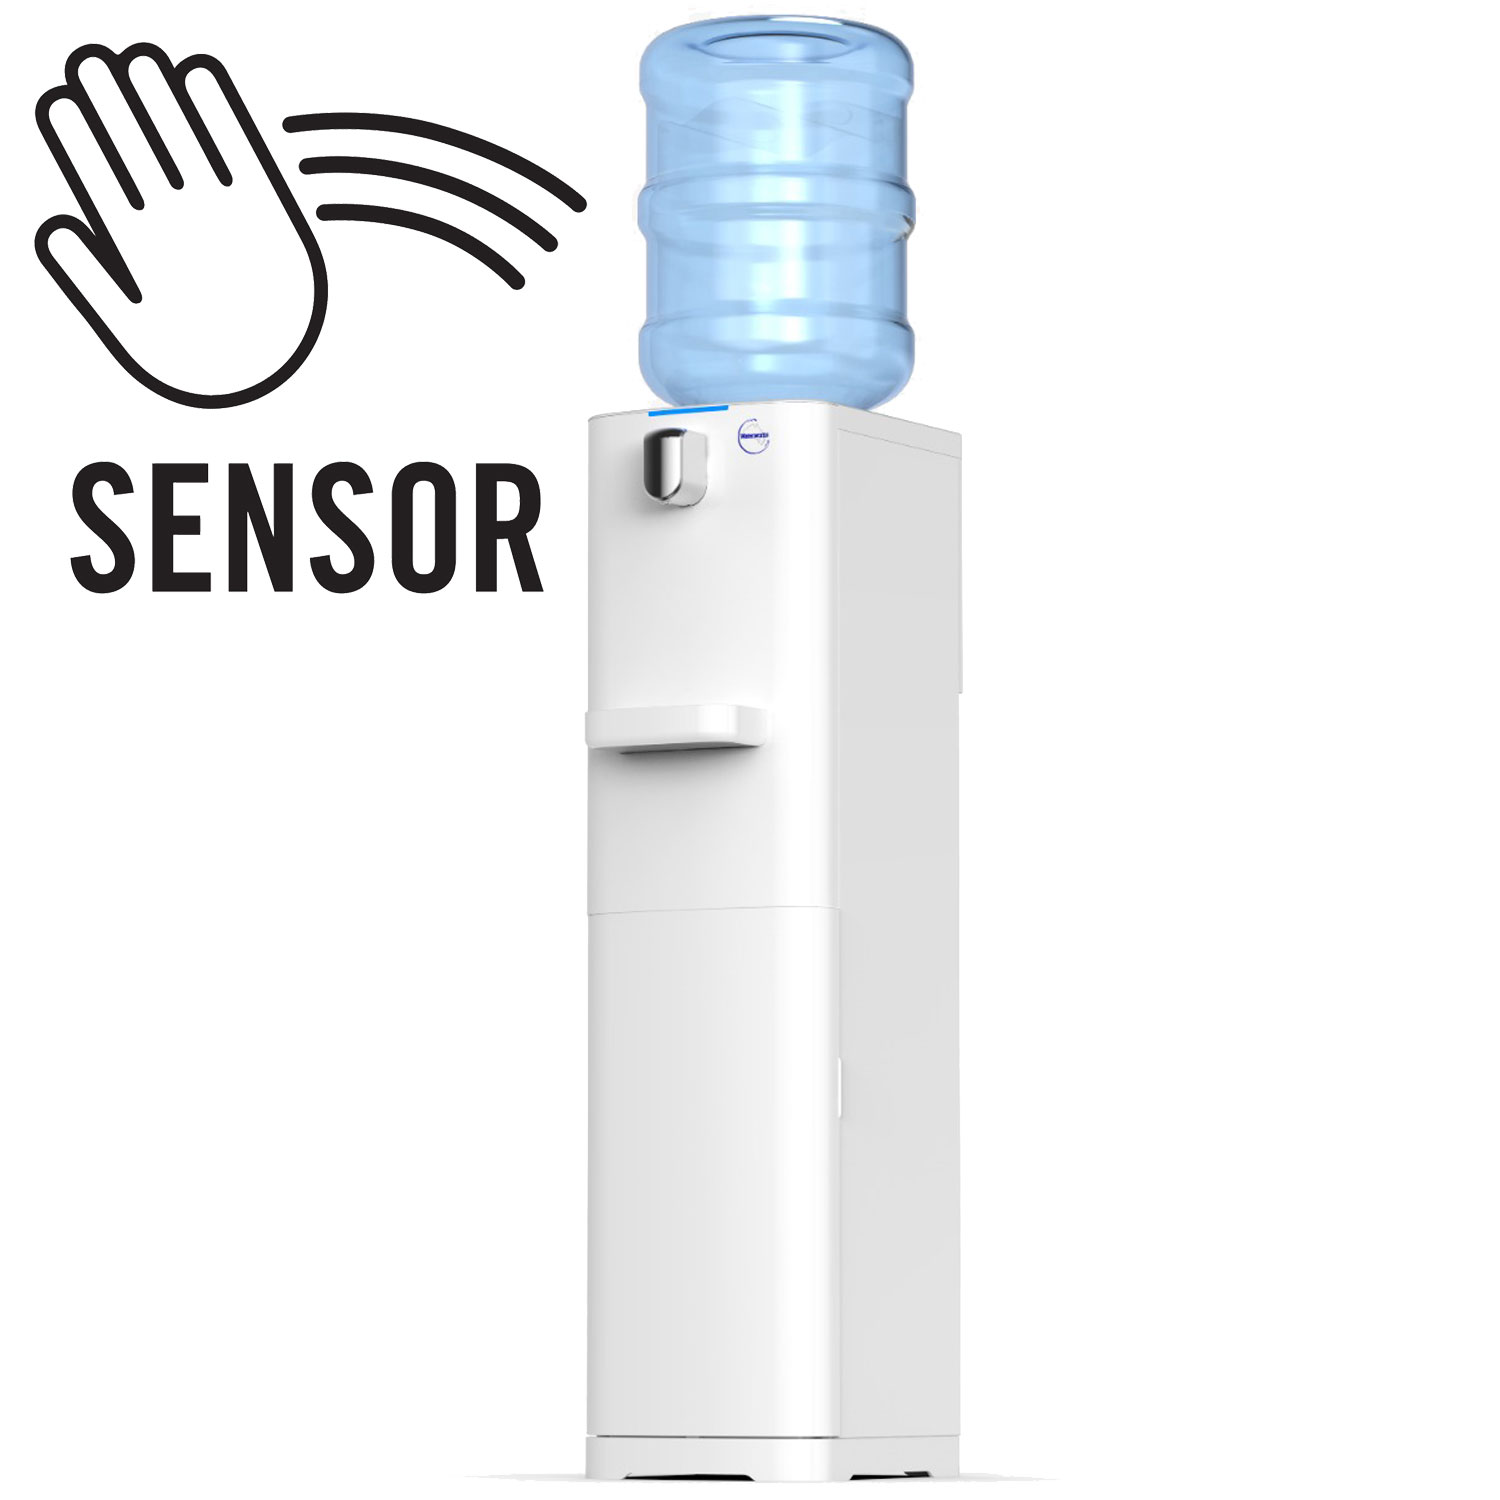 Sensor Activated / Touch Free Products